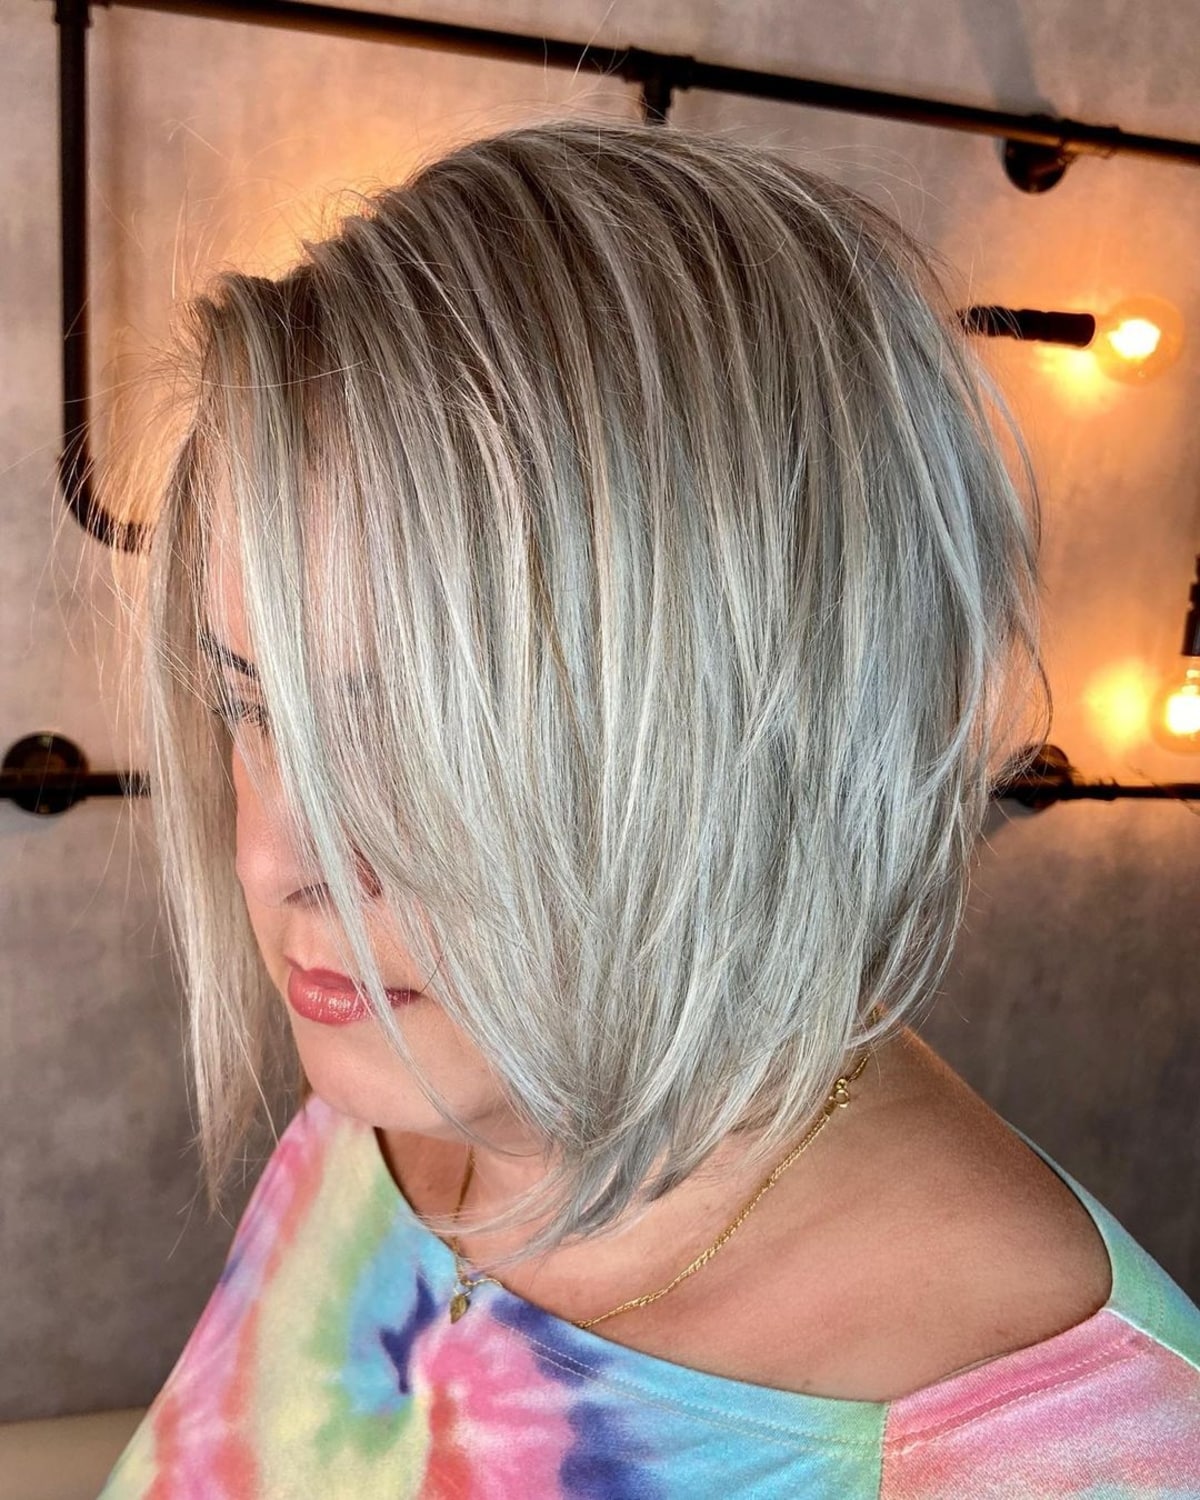 28 of the Best Stacked Haircut Ideas Trending This Season